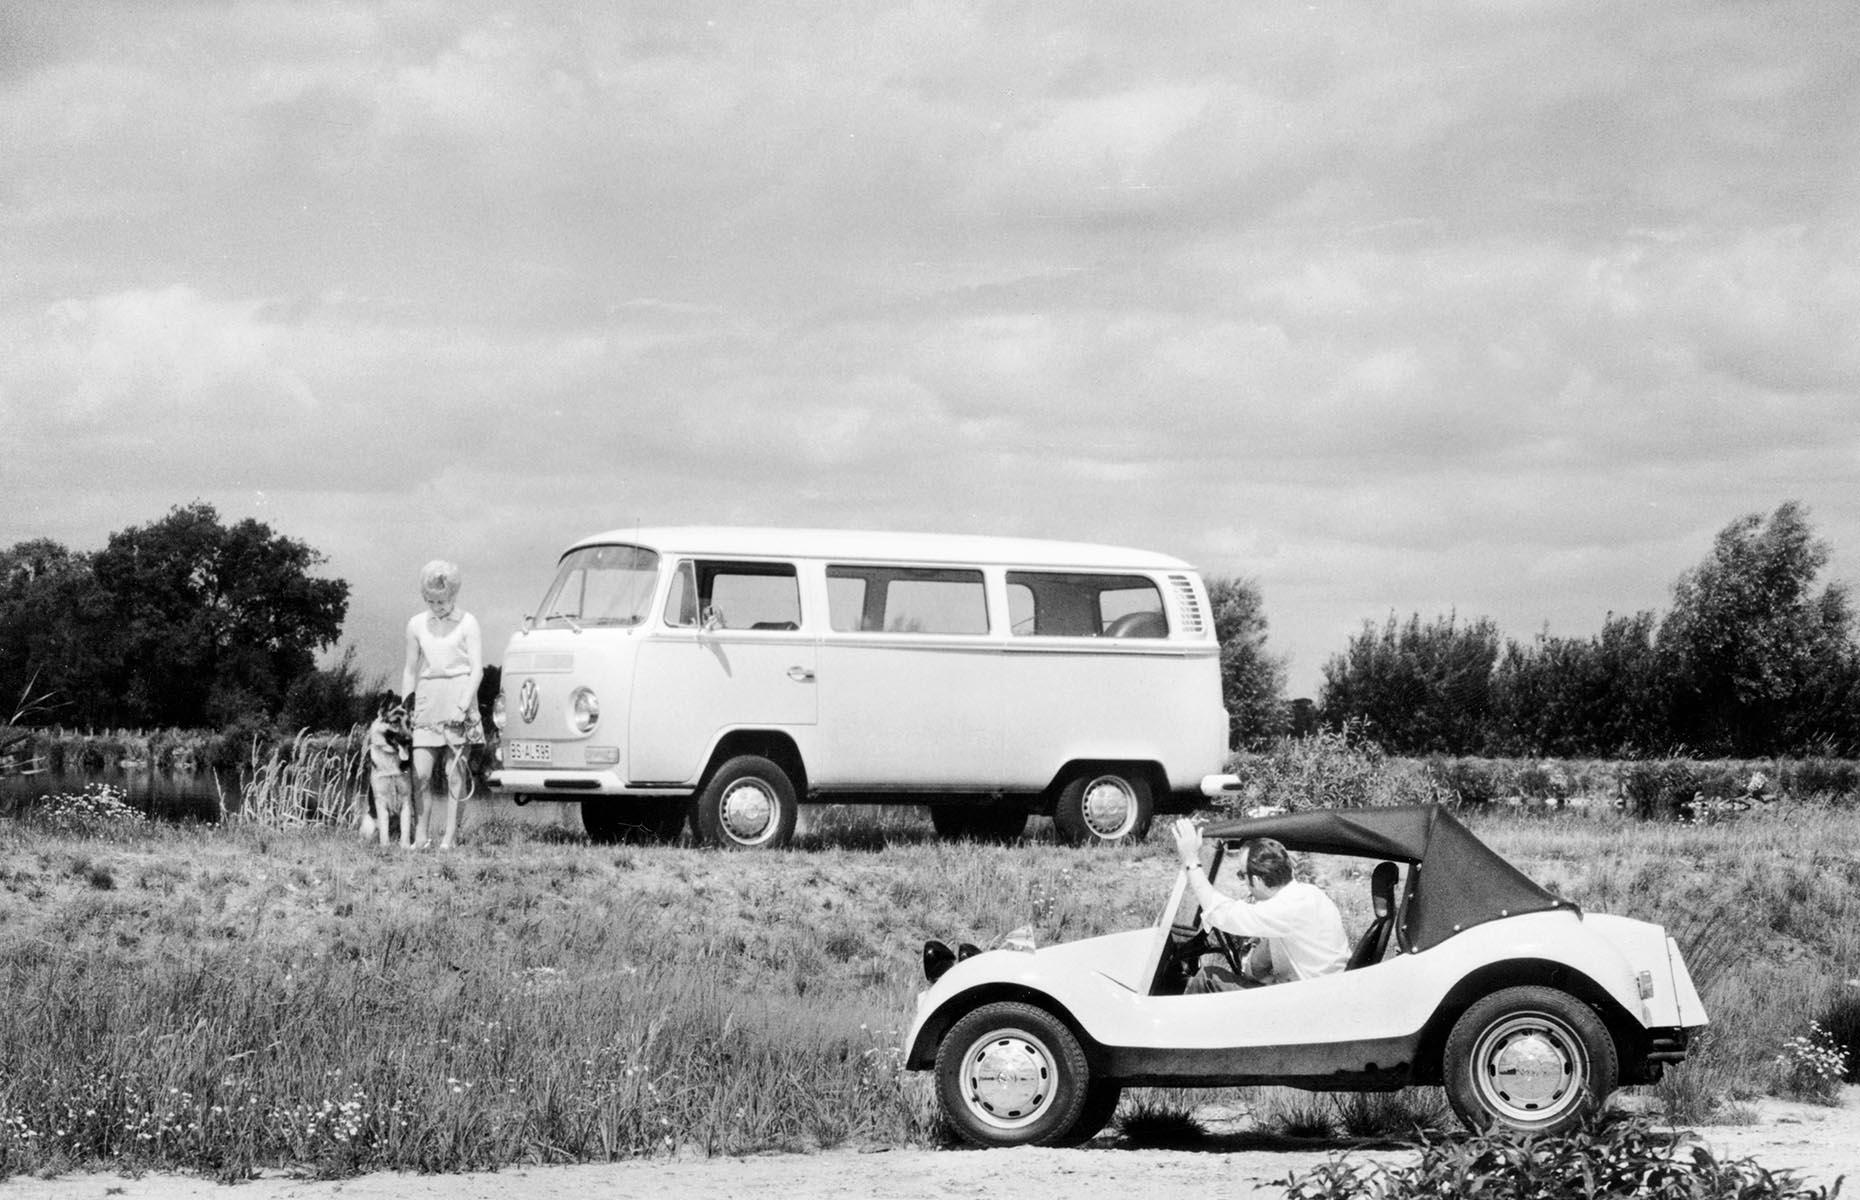 <p>Combining a beach escape with a camper van adventure was – and still is – a popular vacation style. In this dreamy 1970s shot, a man pulls up in a beach buggy while a woman and her dog stand by a smart VW camper van.</p>  <p><strong><a href="https://www.loveexploring.com/galleries/114413/dream-drives-your-states-most-scenic-road">Take a look at your state's most scenic road</a></strong></p>